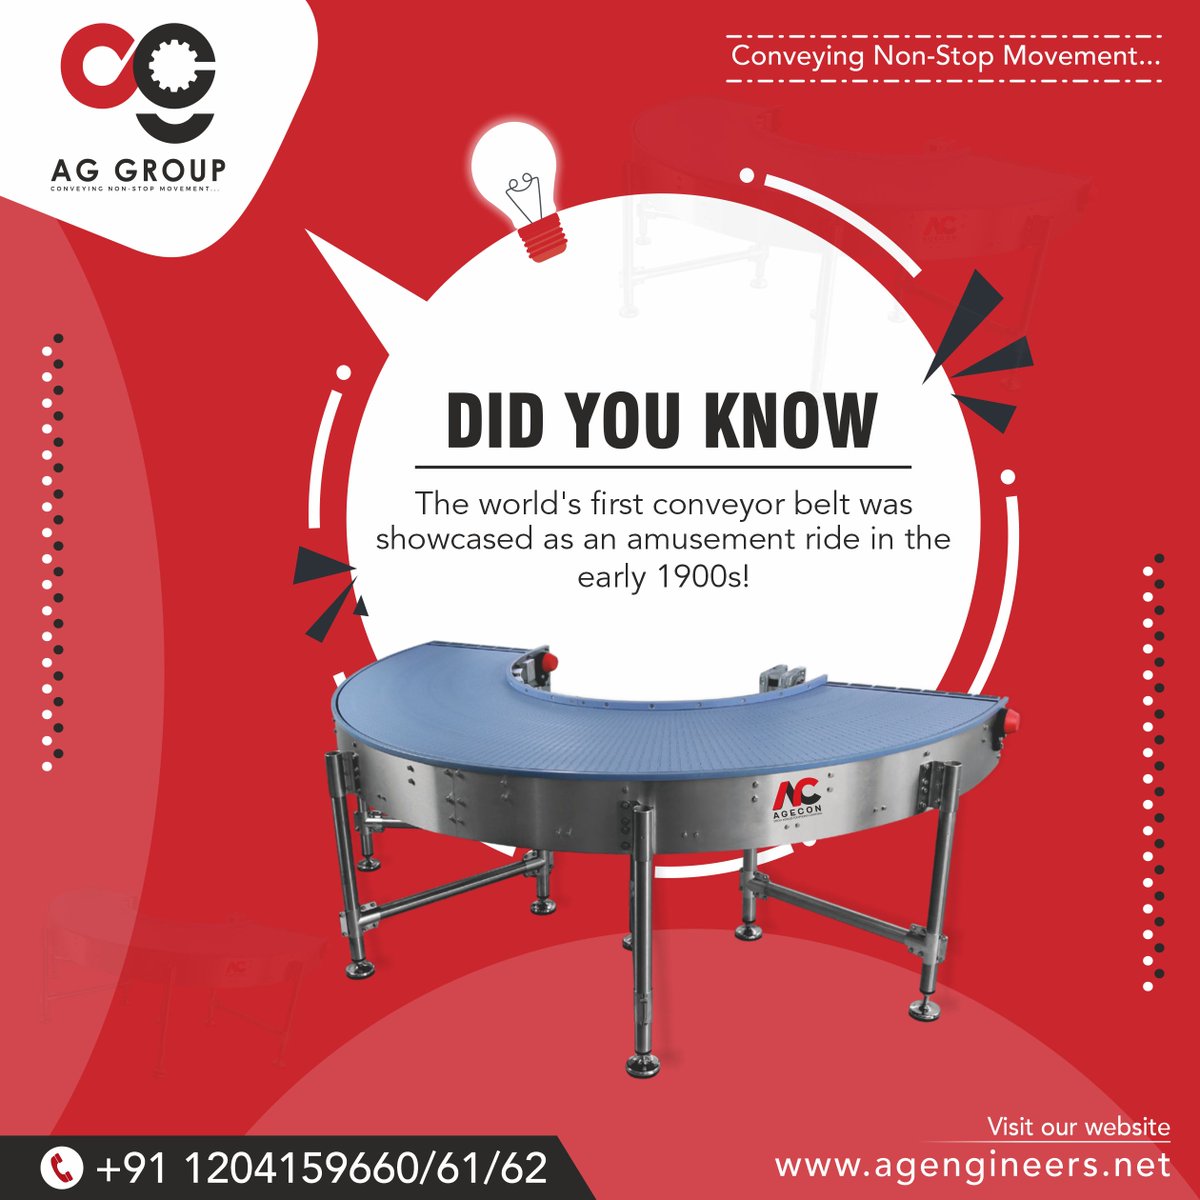 Did You Know ?
.
#aggroup #agengineers #funfact #DidYouKnow  #conveyor #conveyorbelts #modularbelts #conveyorsystems #conveyorsolution #manufacturingindustry #startupbusiness #b2bbusiness #b2cbussiness  #innovation #materialHandling #engineering #efficiency